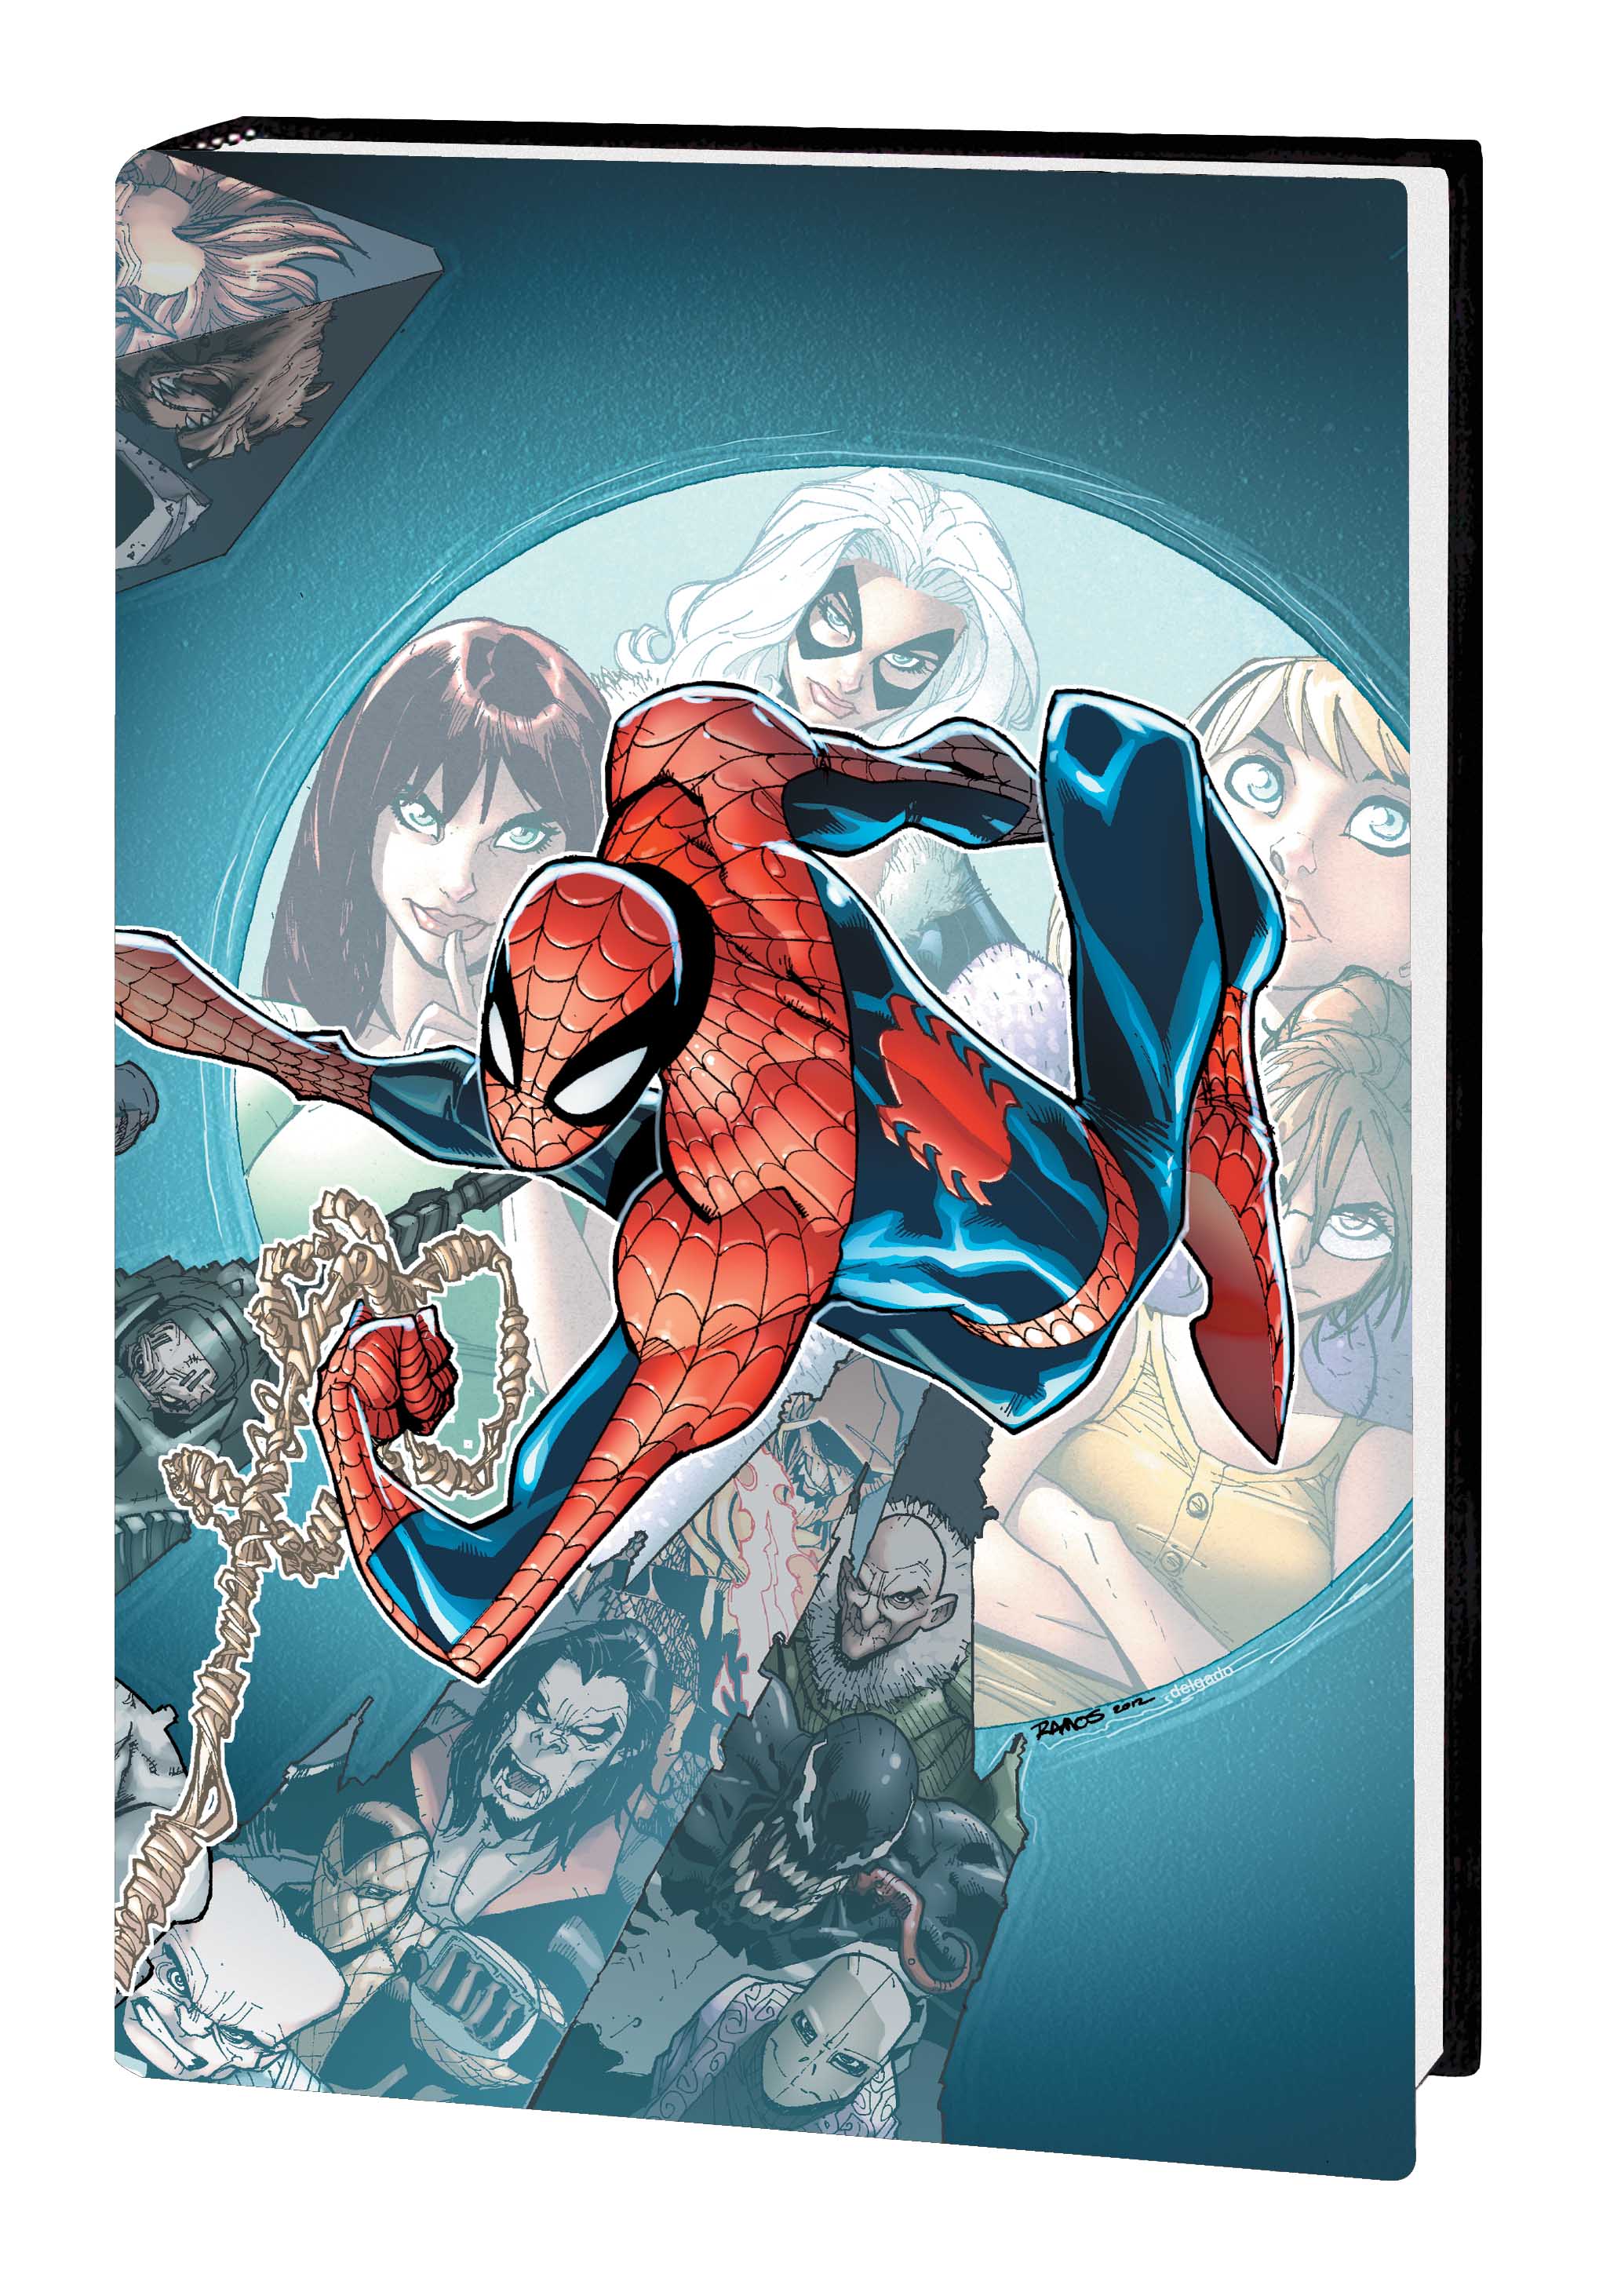 SPIDER-MAN: DYING WISH PREMIERE HC (Hardcover)